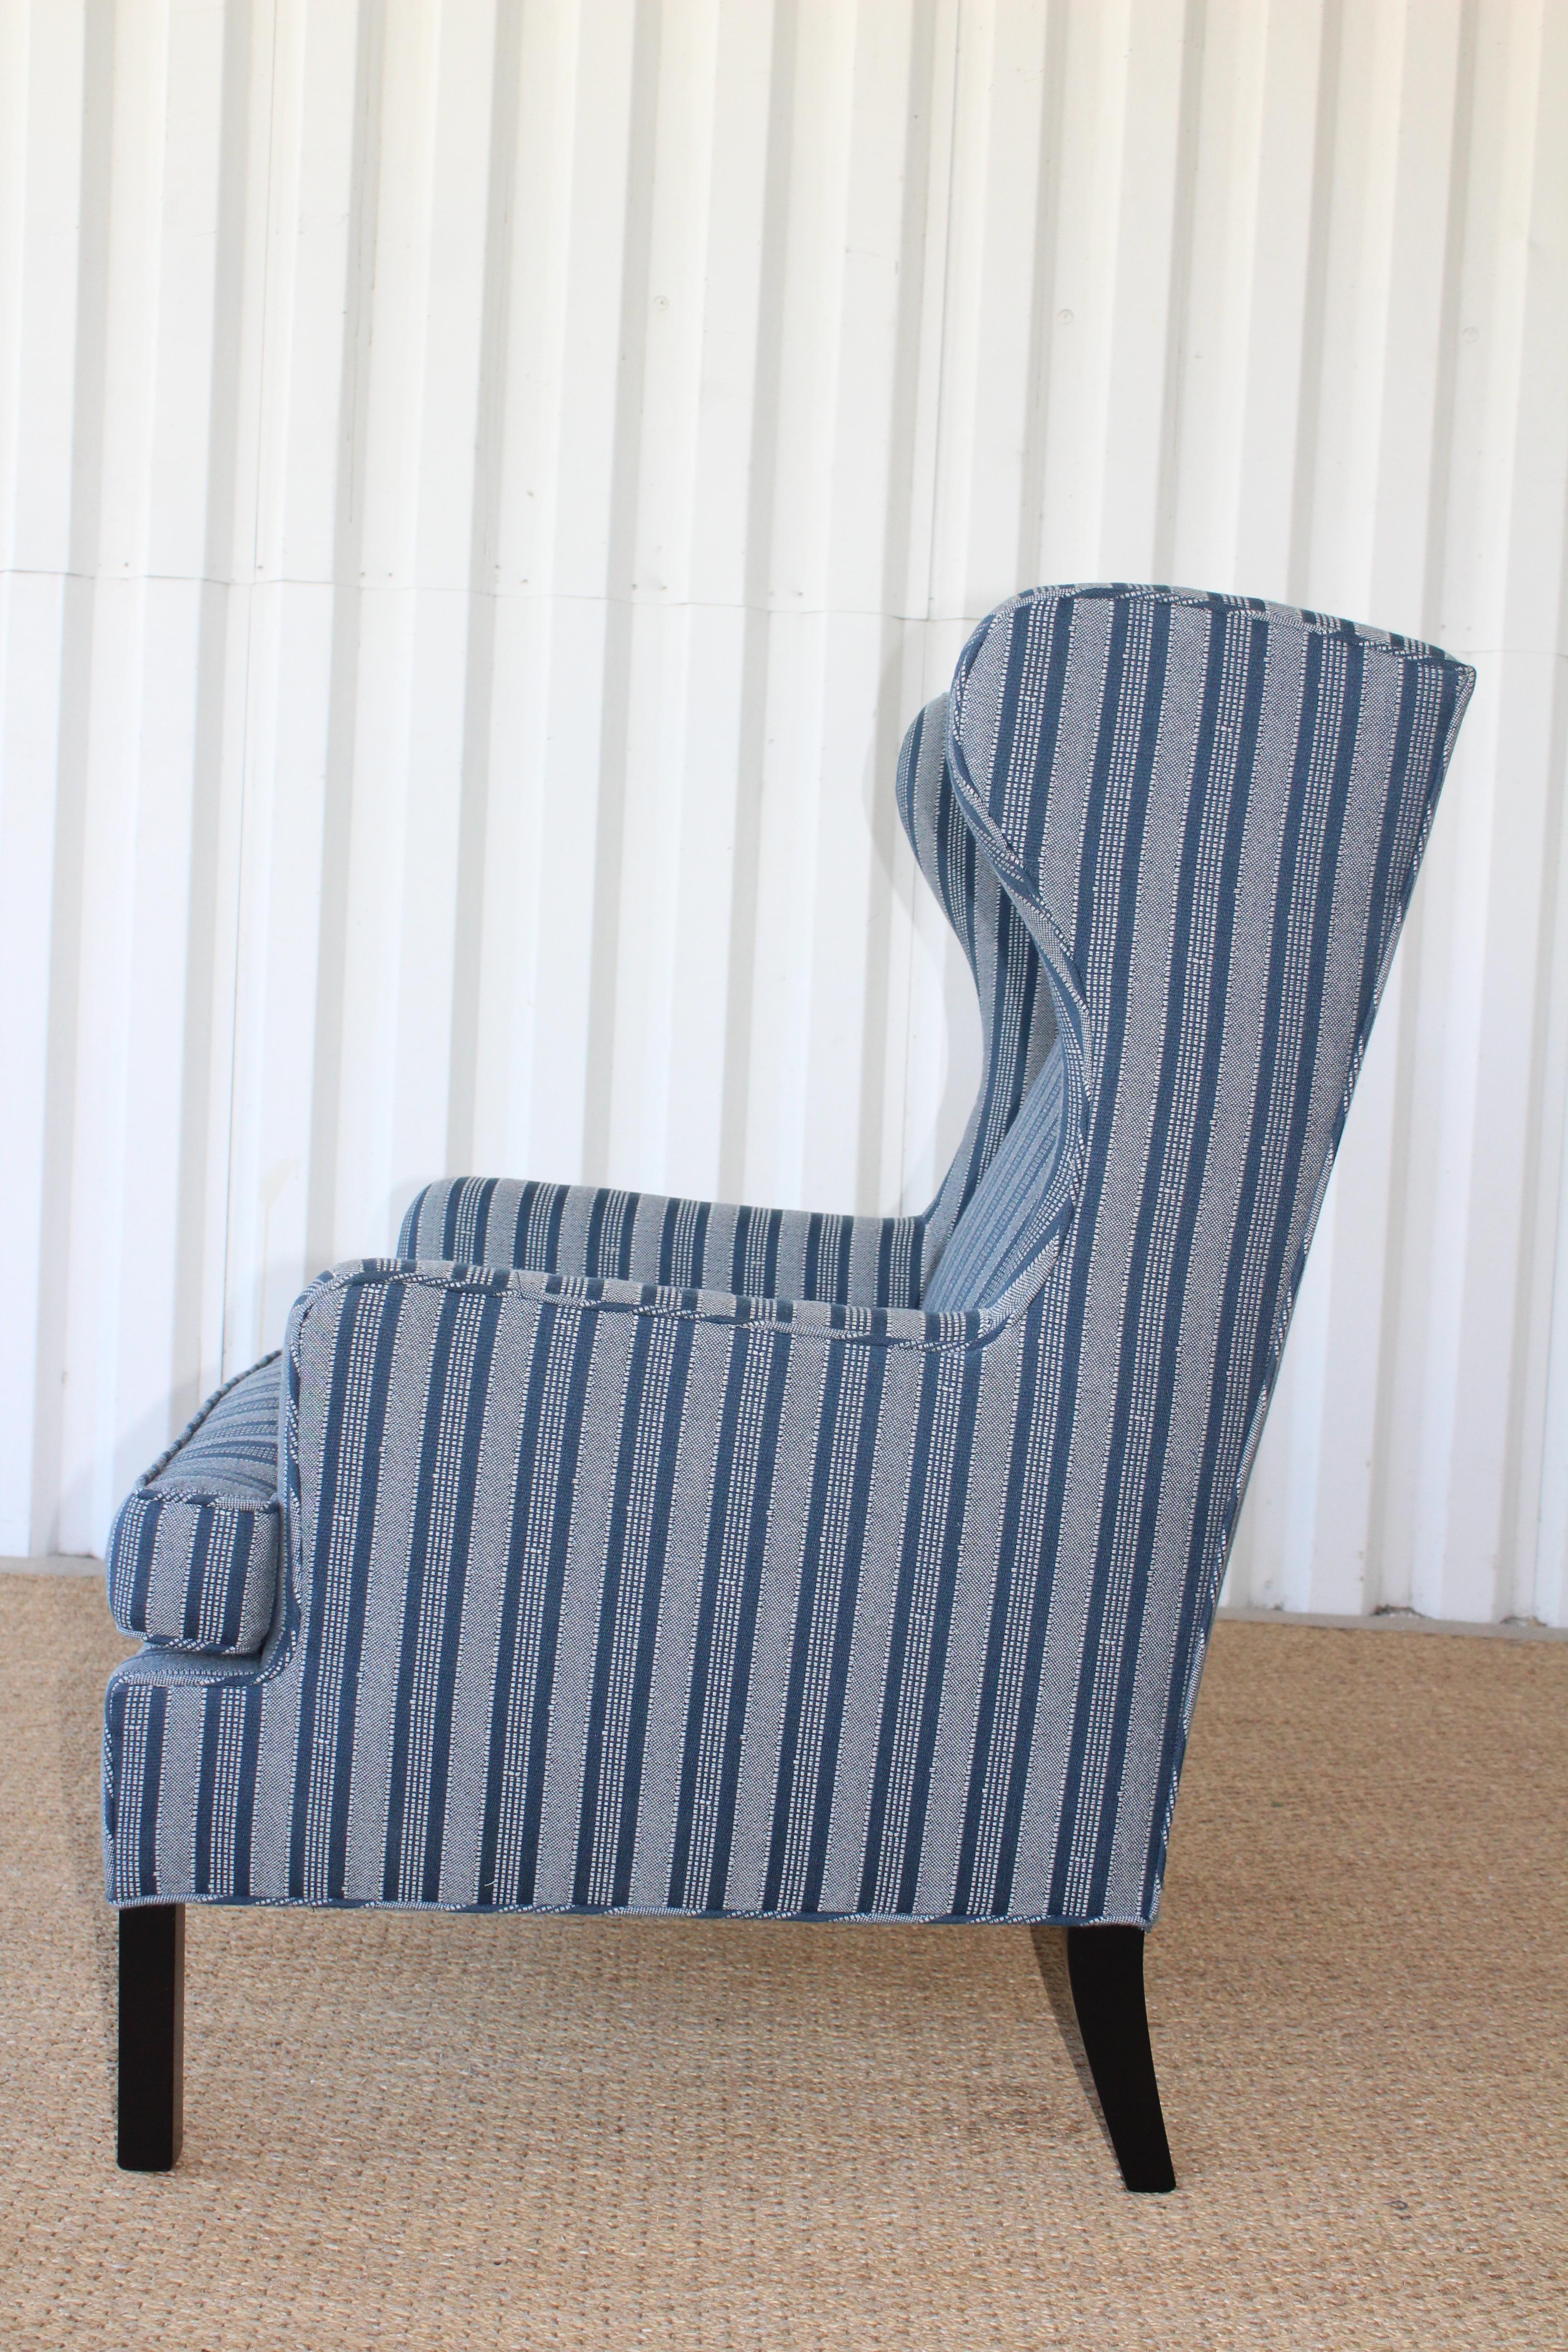 1950s Danish High Back Wing Chair Upholstered in Peter Dunham Textiles Fabric 3